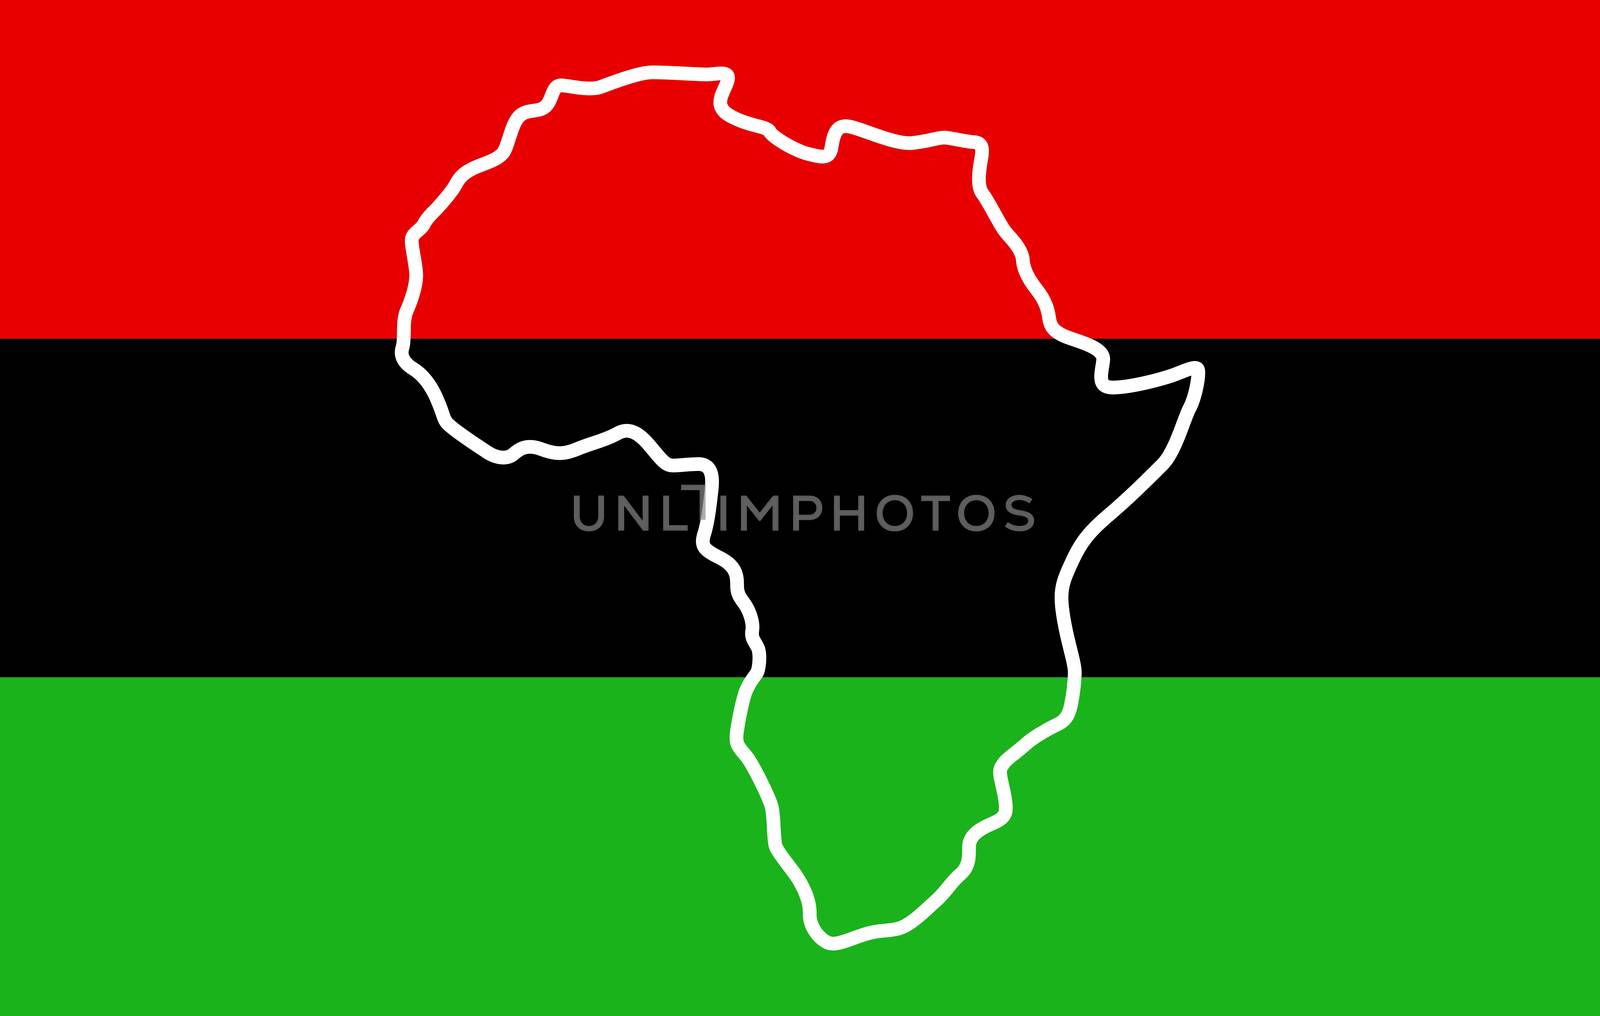 Afro-American people flag by tony4urban